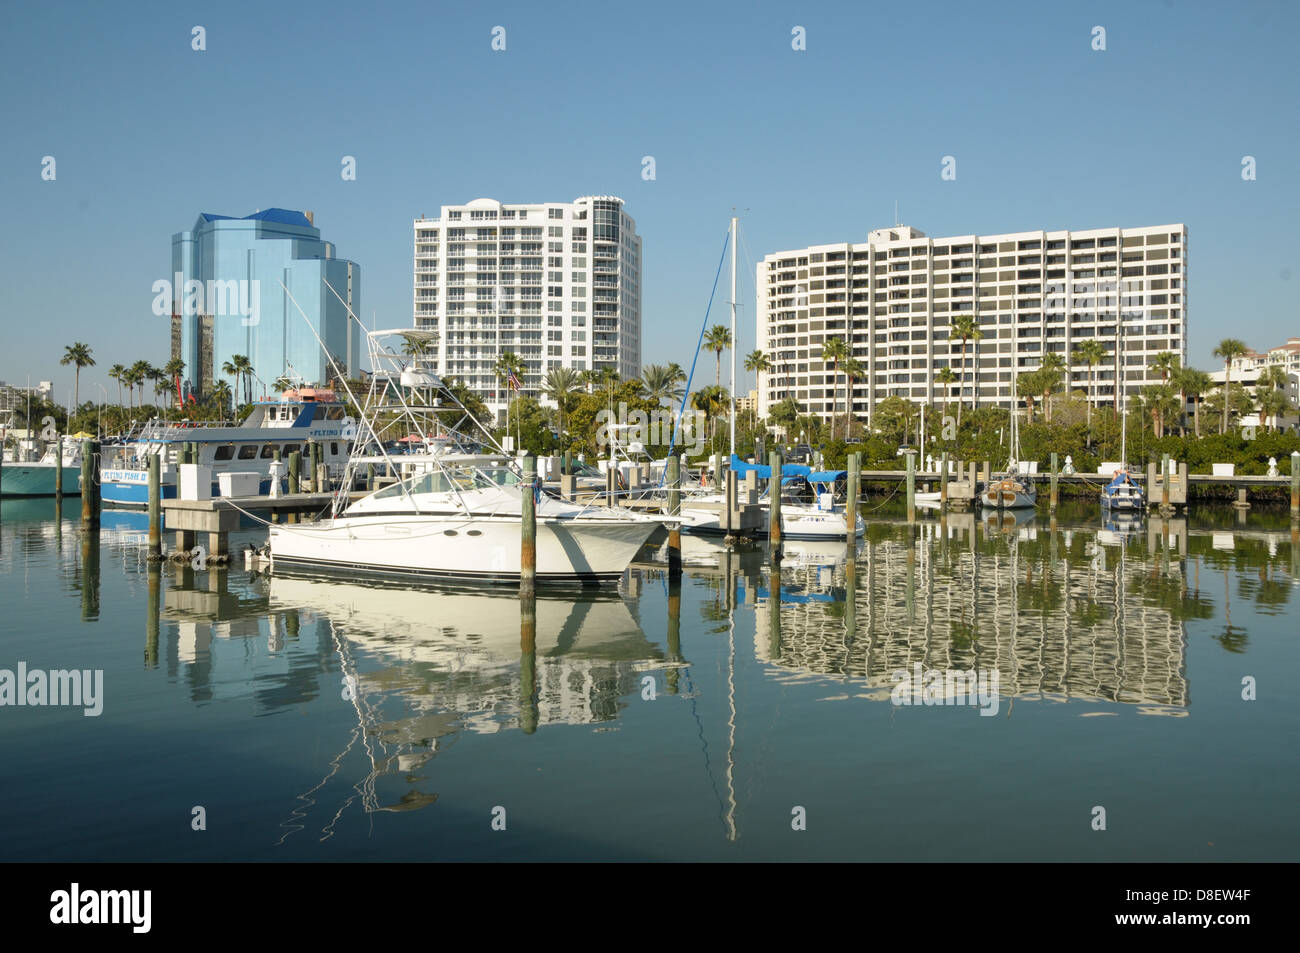 A flotilla of boats is moored at the Sarasota, Florida bay with buildings in the background. Stock Photo